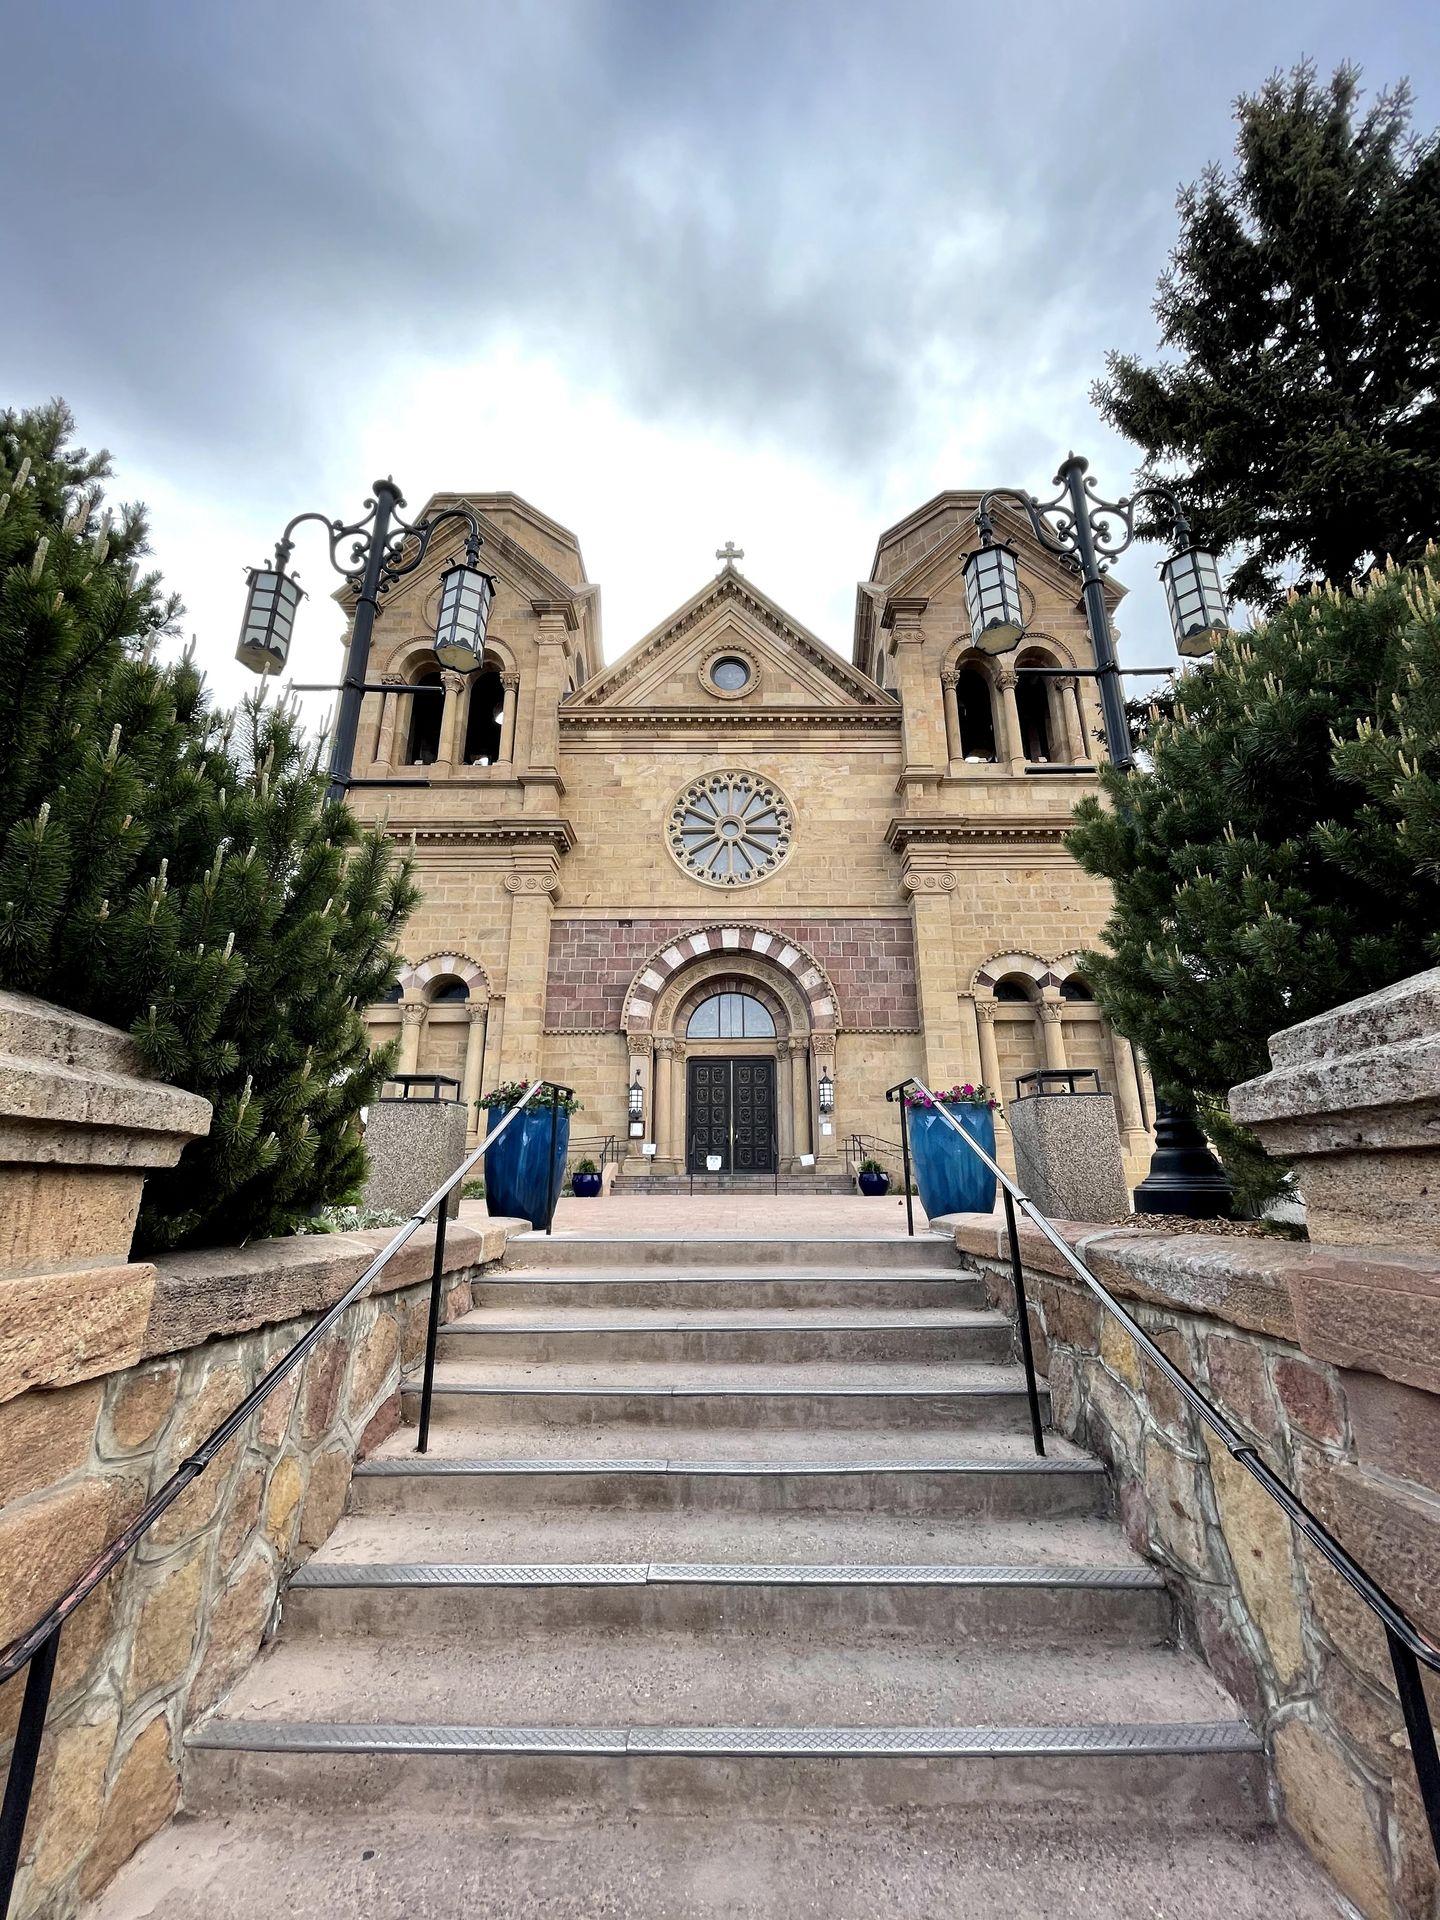 Looking up the steps at the Basilica of St. Francis, a famous church in Santa Fe.